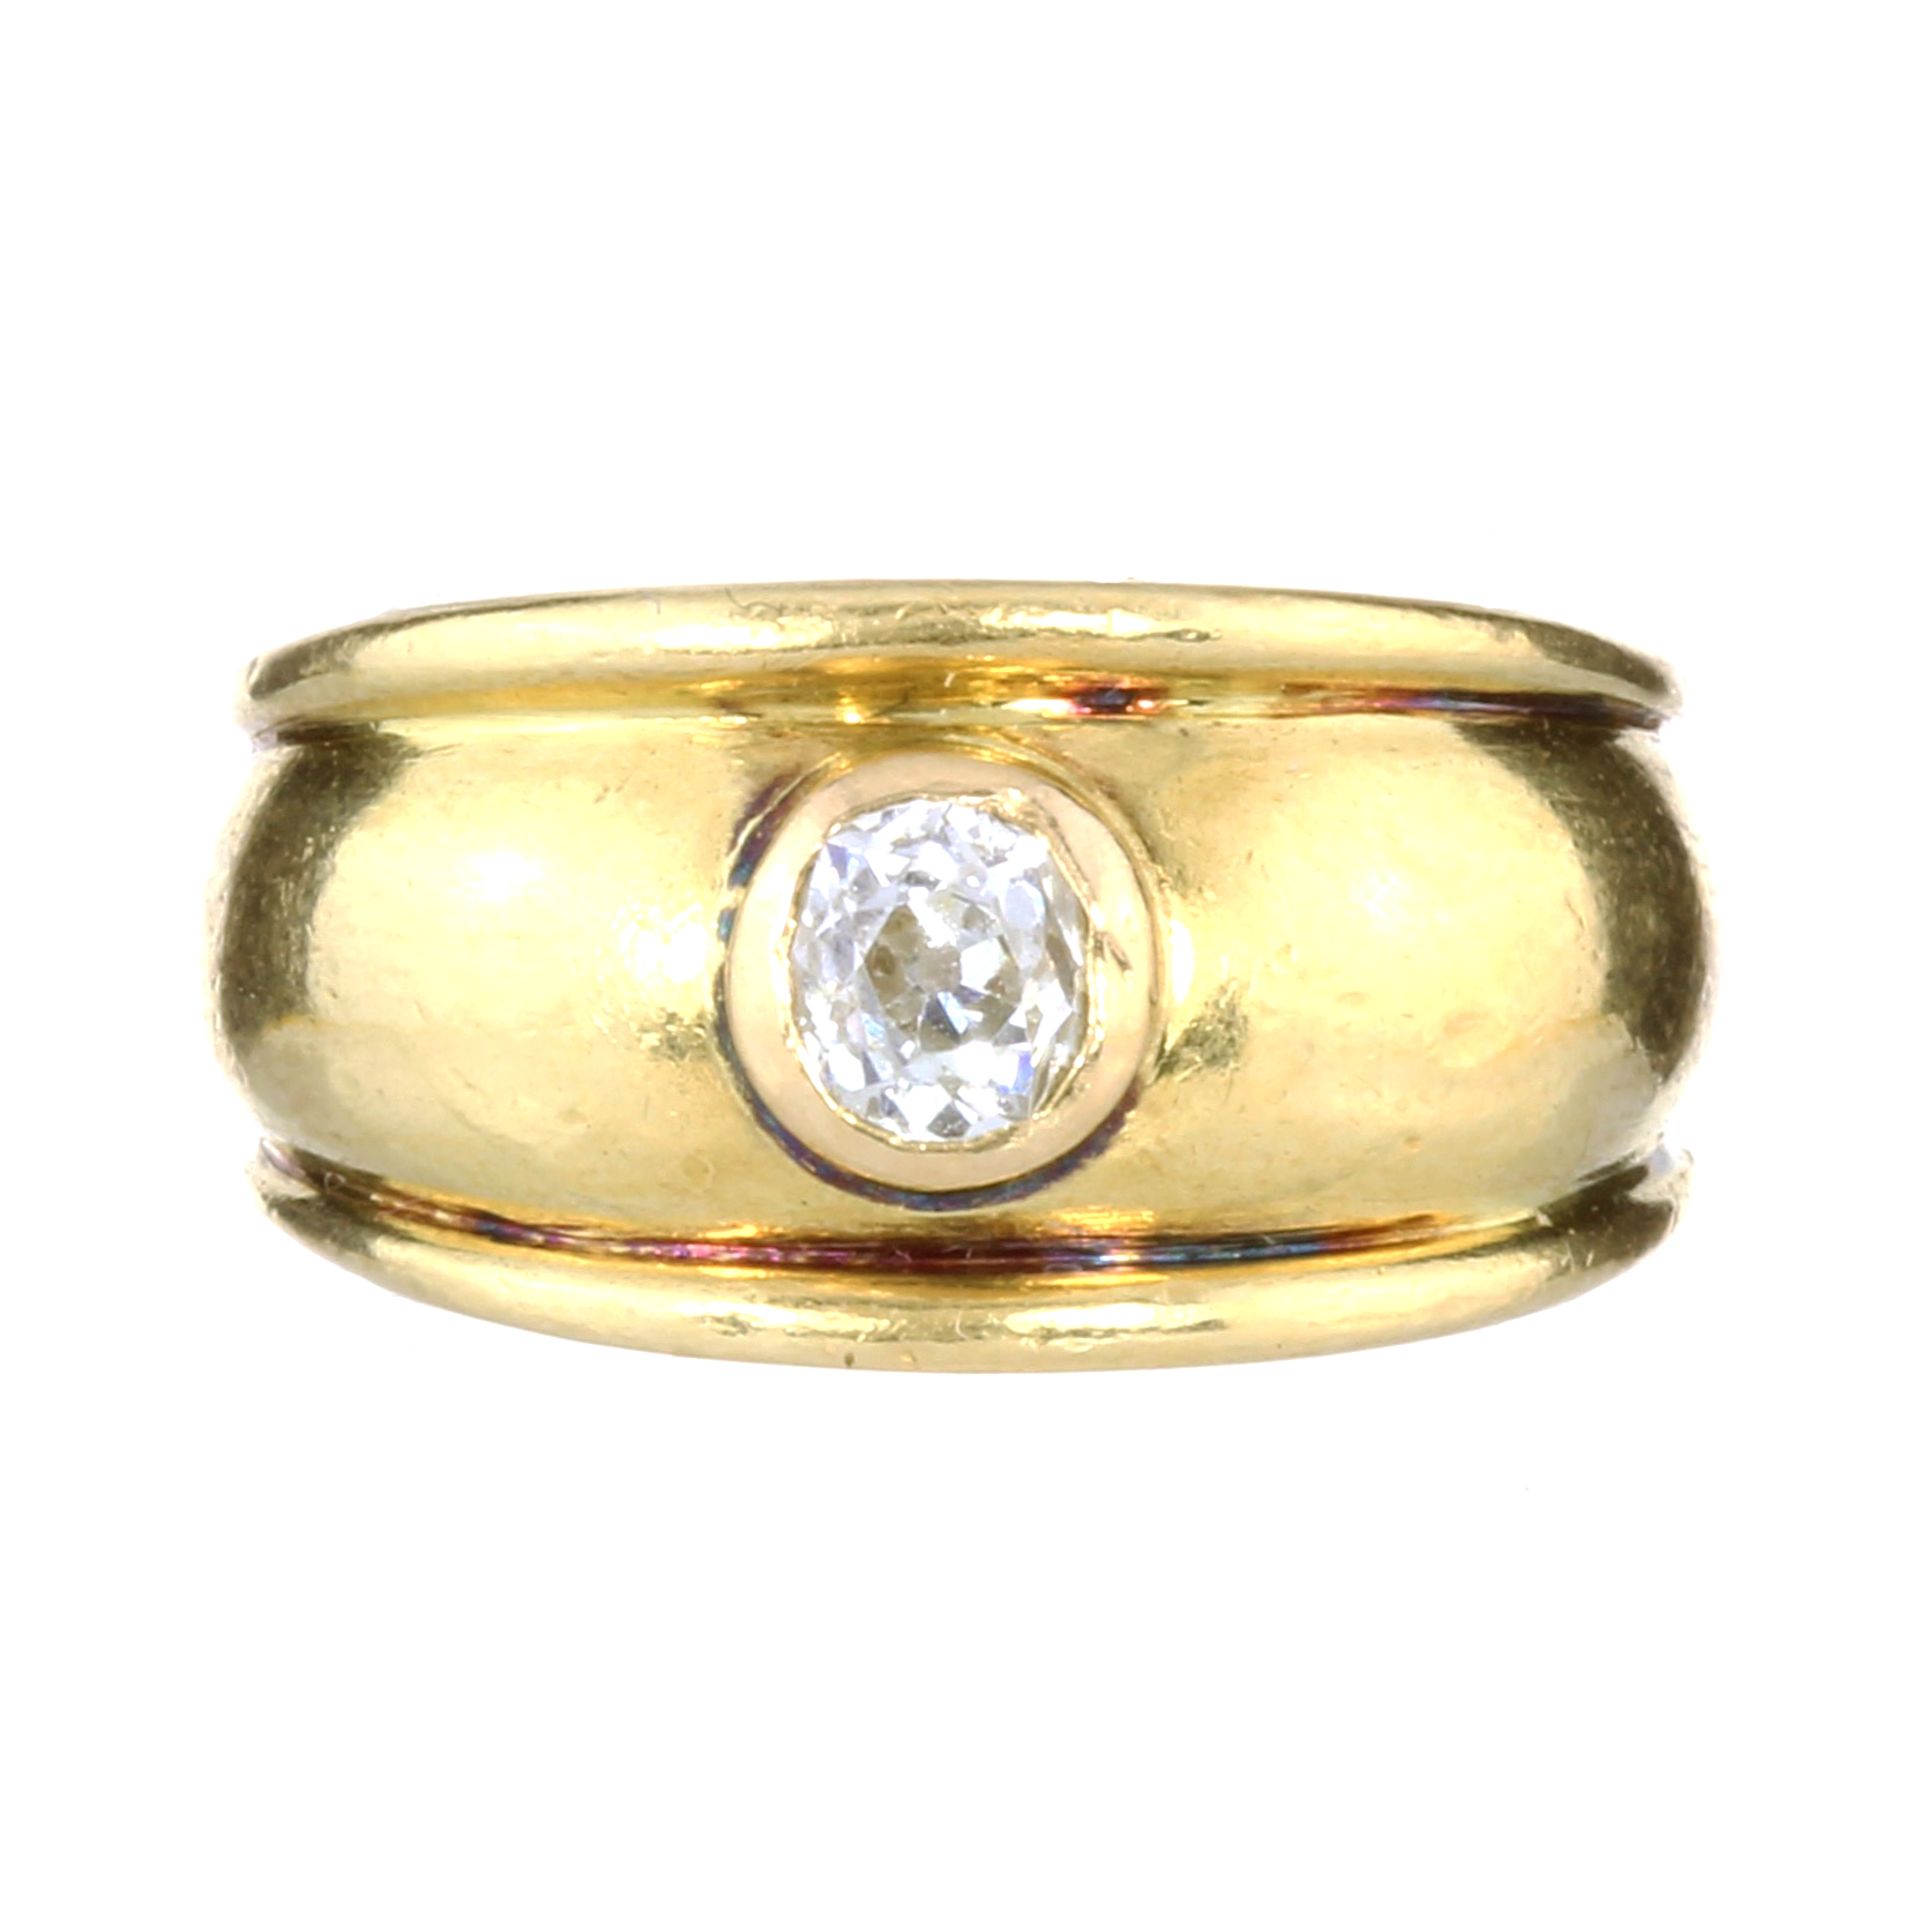 AN ANTIQUE 0.50 CARAT SOLITAIRE DIAMOND RING in 18ct yellow gold, the thick band with ribbed